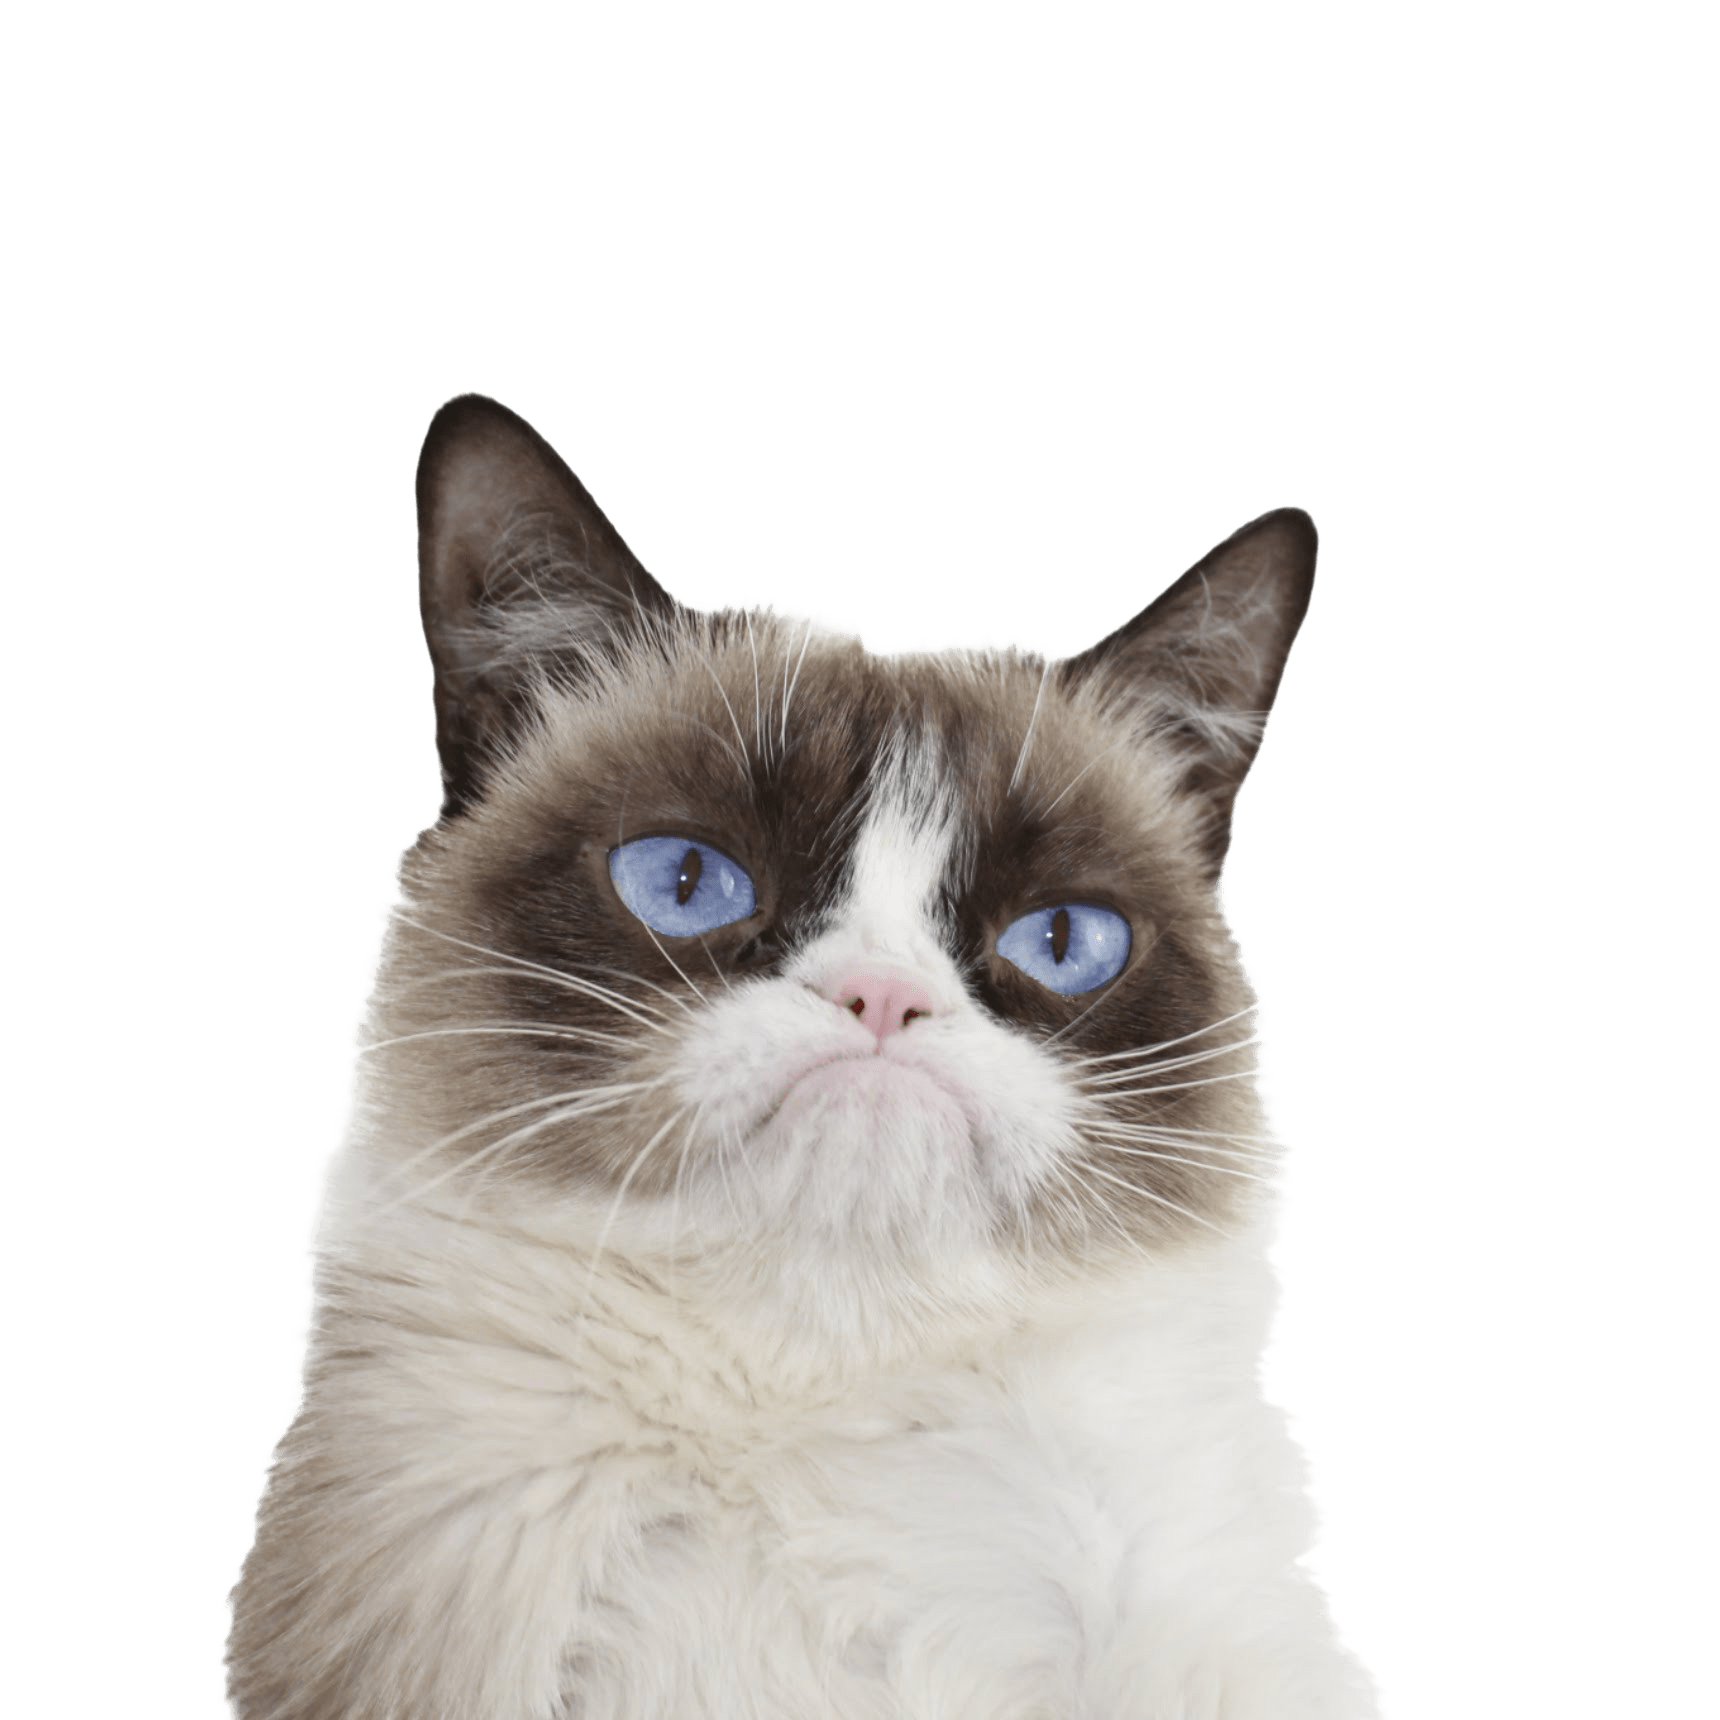 Grumpy Face Cat PNG Image High Quality PNG Image